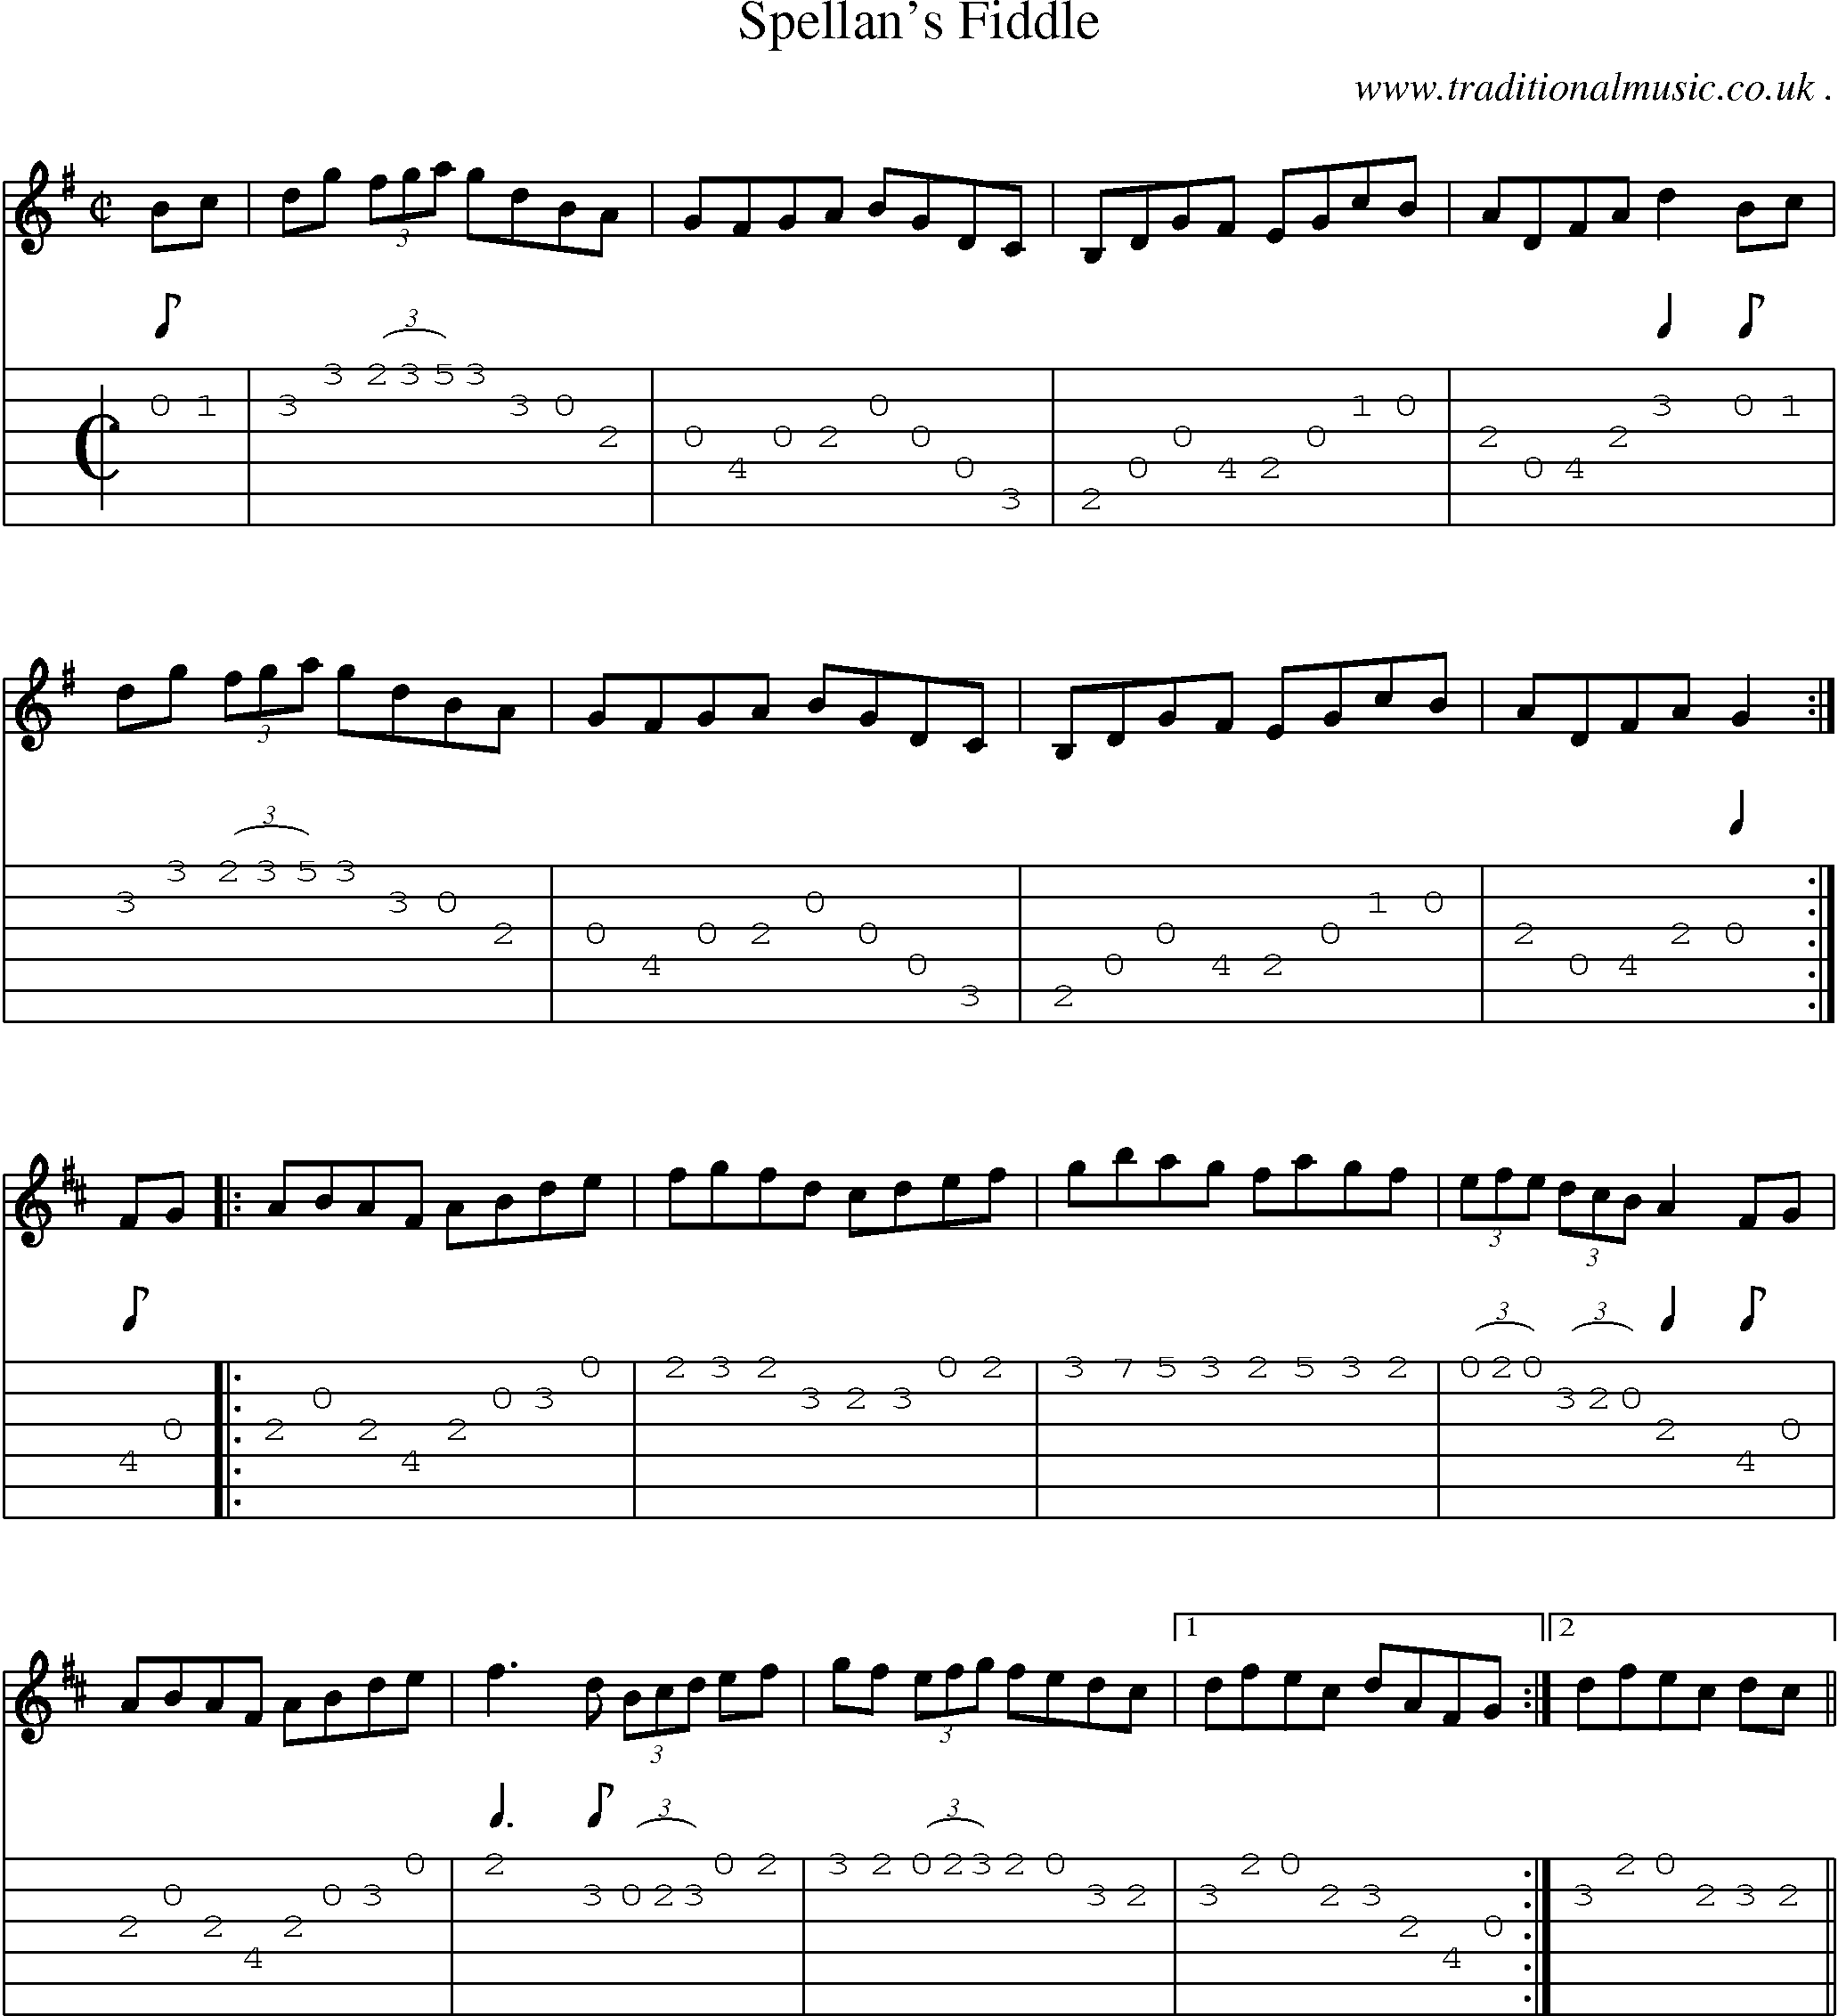 Sheet-Music and Guitar Tabs for Spellans Fiddle